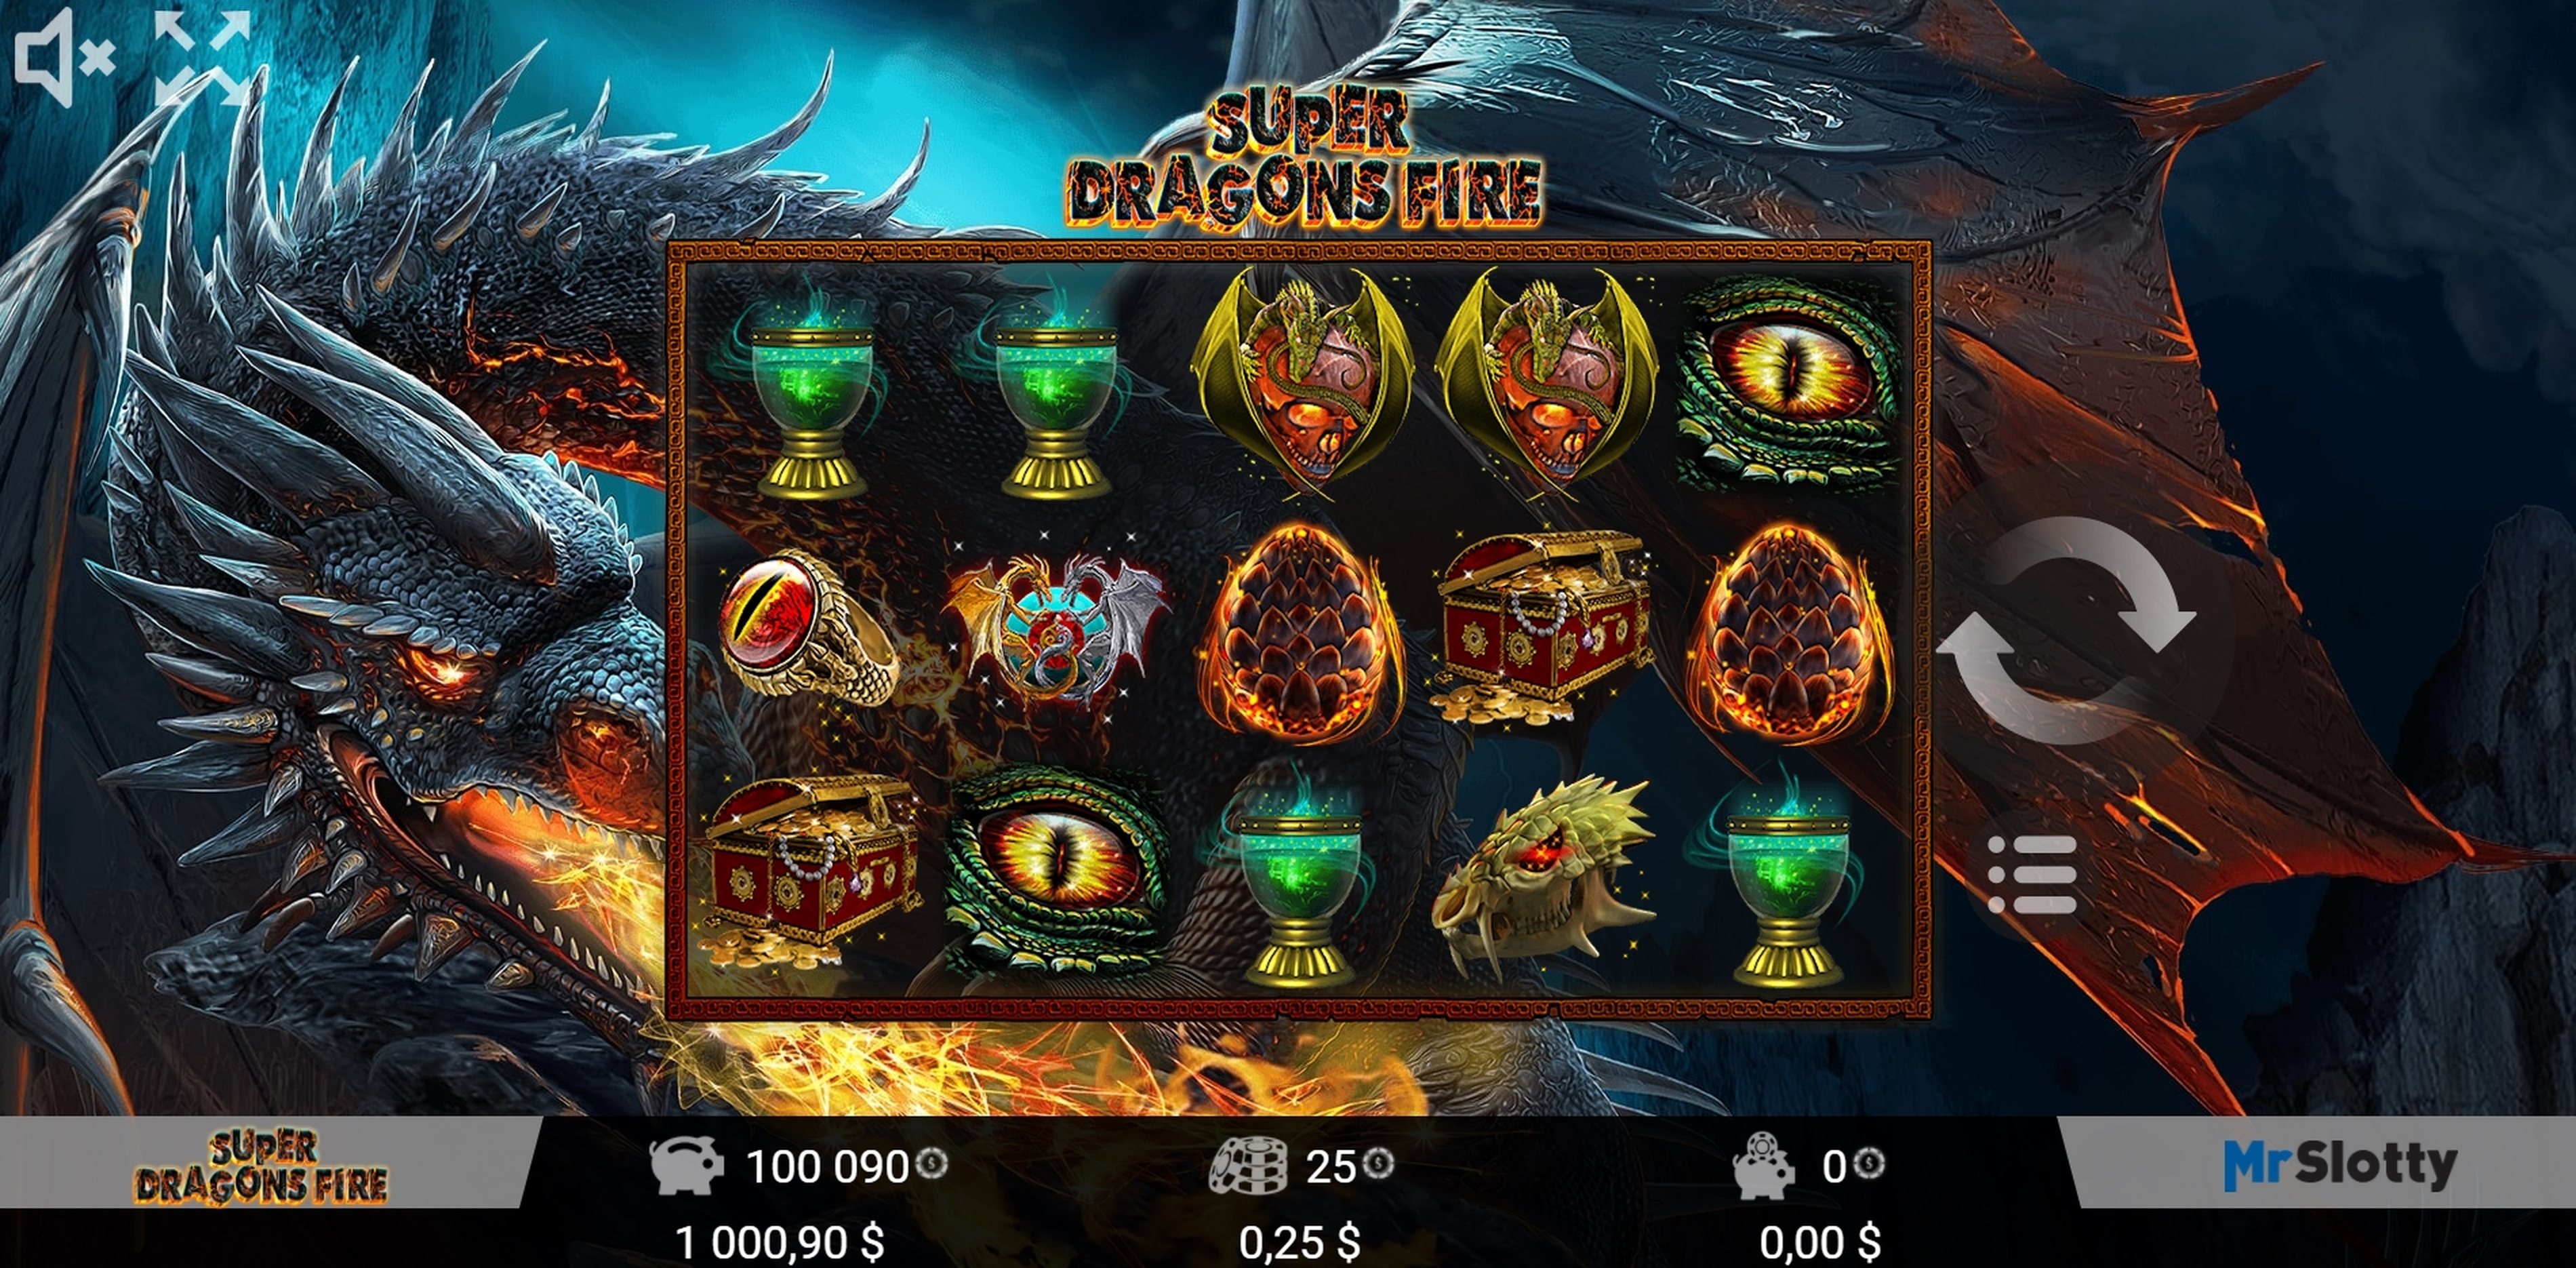 Reels in Super Dragons Fire Slot Game by Mr Slotty